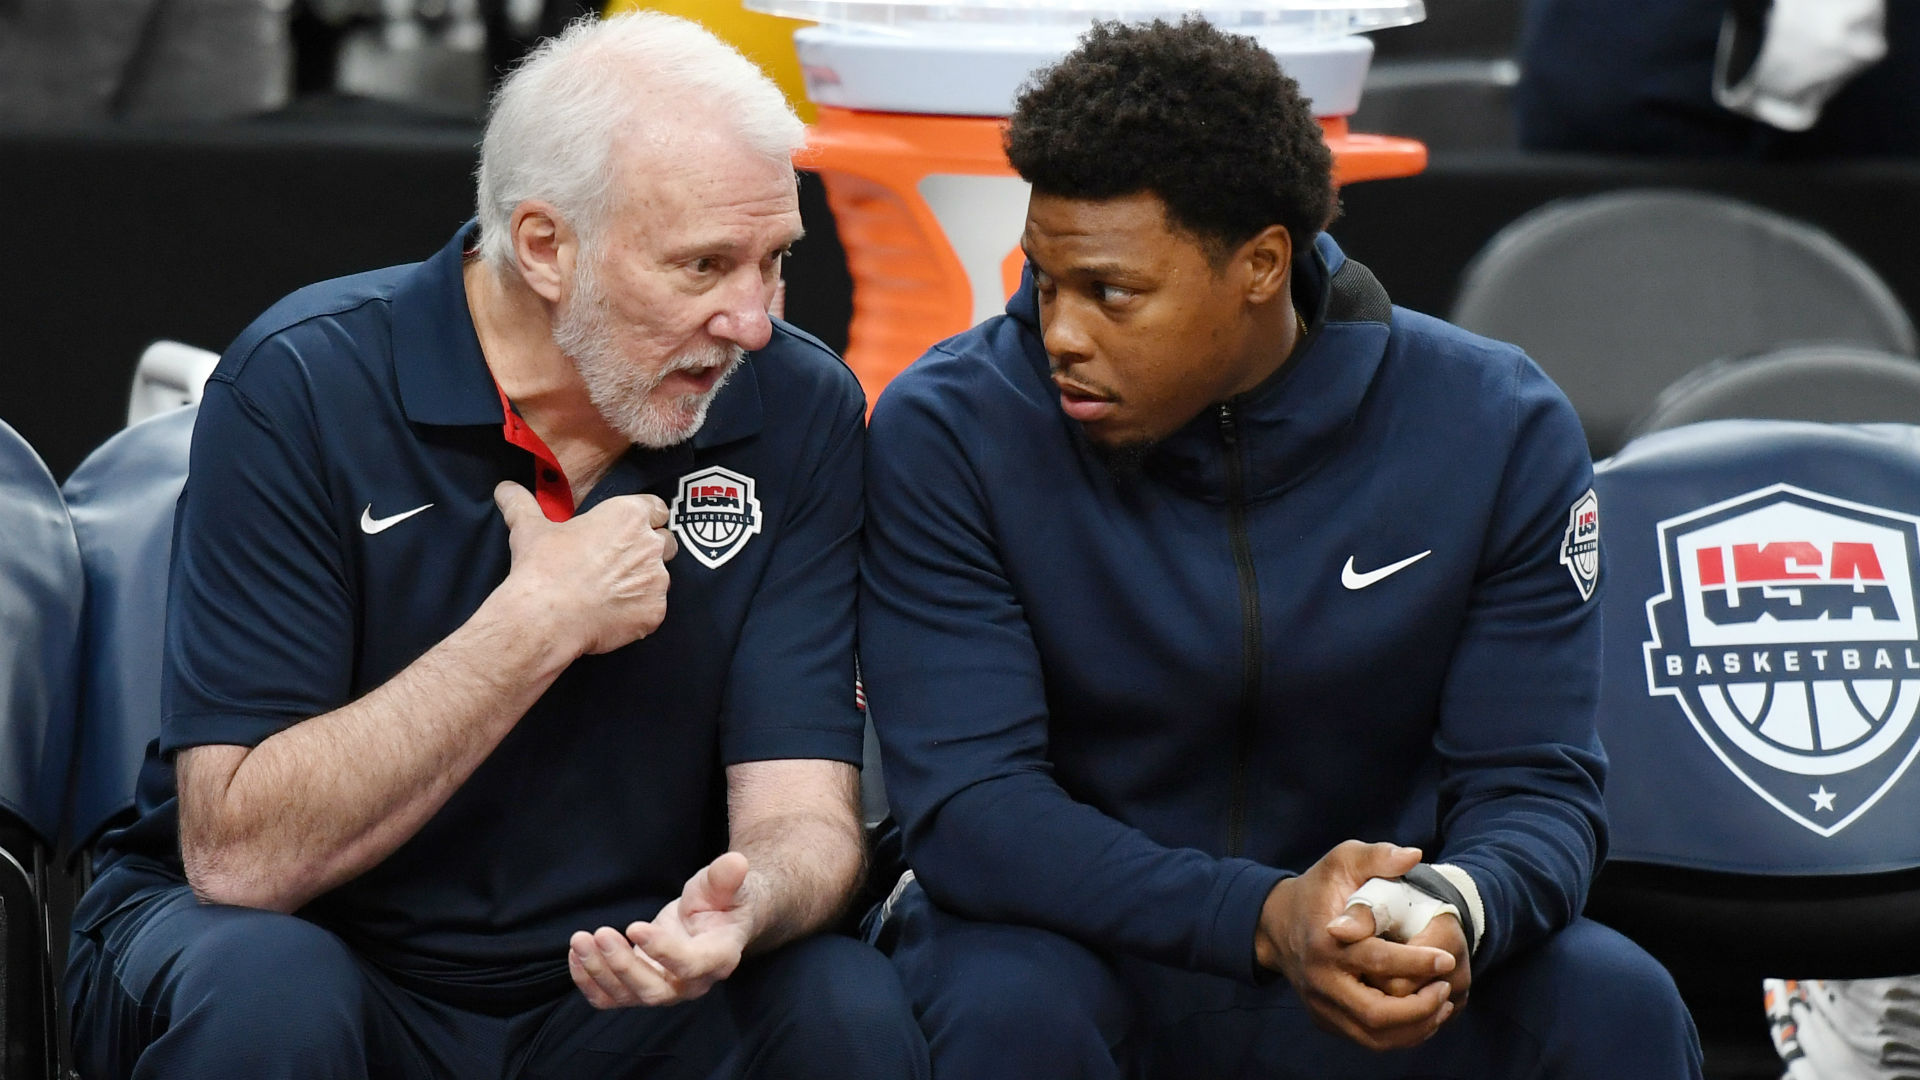 Toronto Raptors guard Kyle Lowry announced his withdrawal from Team USA on Monday, citing health reasons.